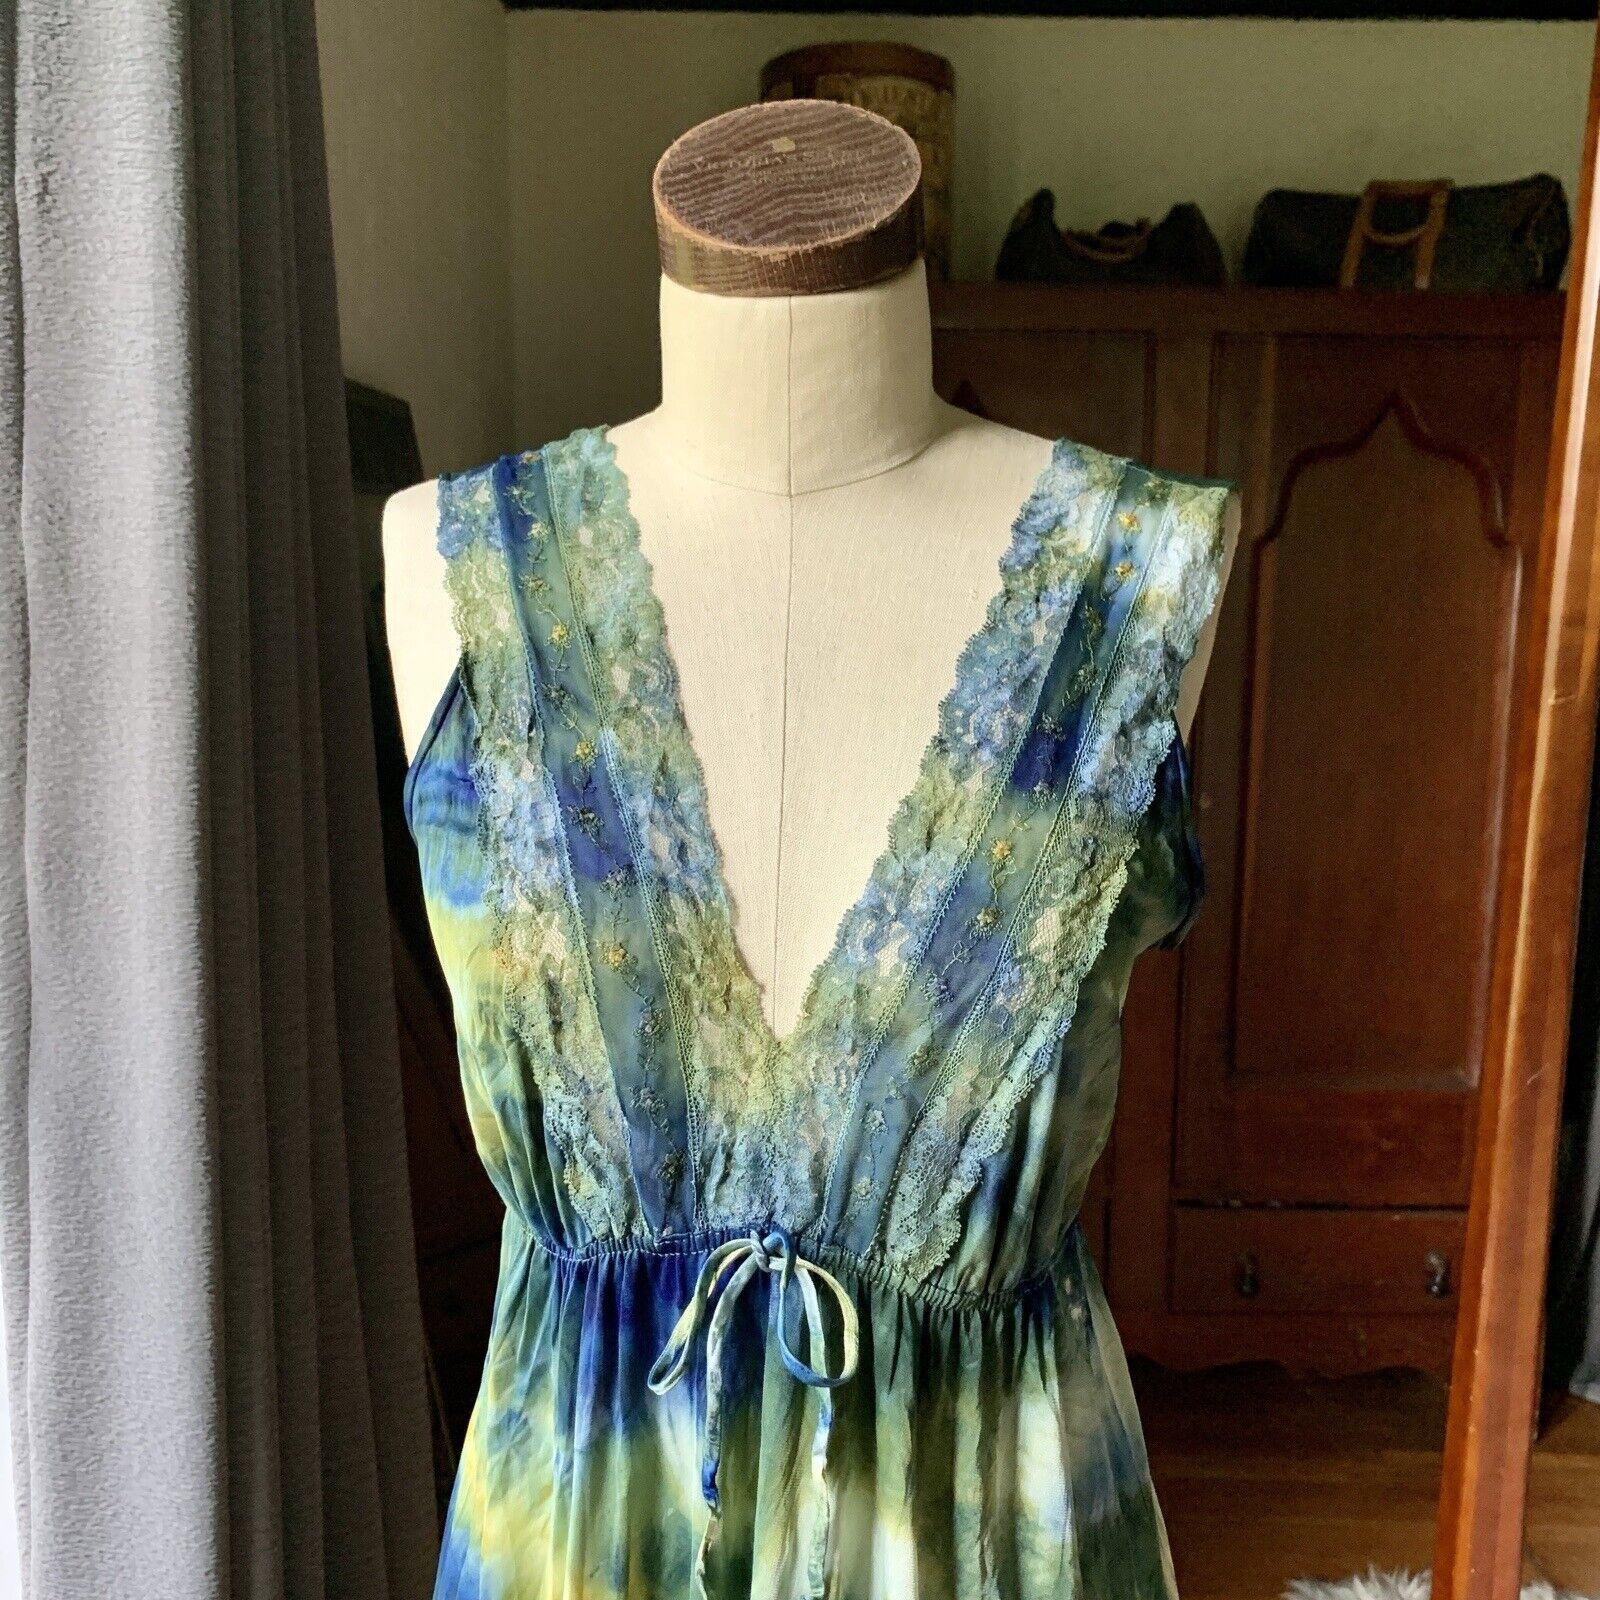 The DYED PETALS Collection (vintage, upcycled, and custom-made fashion using natural dyes and colorants), is designed and offered exclusively by PARPARIAN.

Hand-dyed with Spinach and Indigo
Vintage Brand: No Label
Lace Top with Bow
Material: